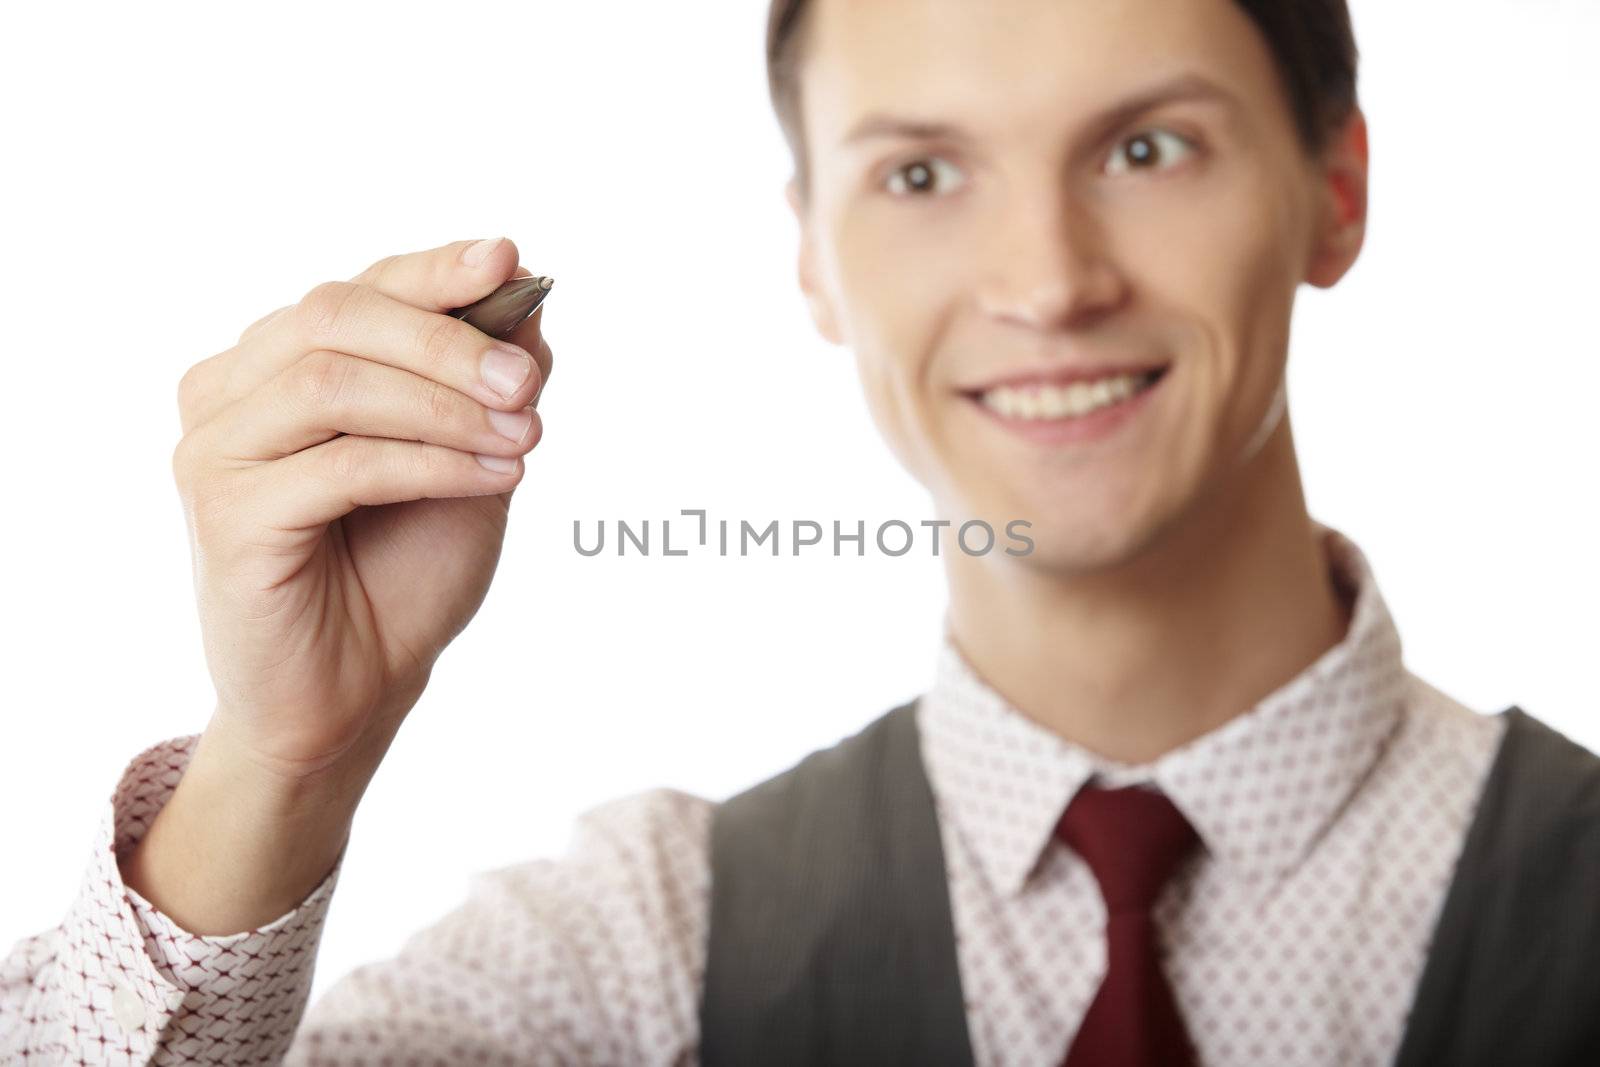 Smiling businessman is writing on a virtual whiteboard. Focus is on the hand and pen